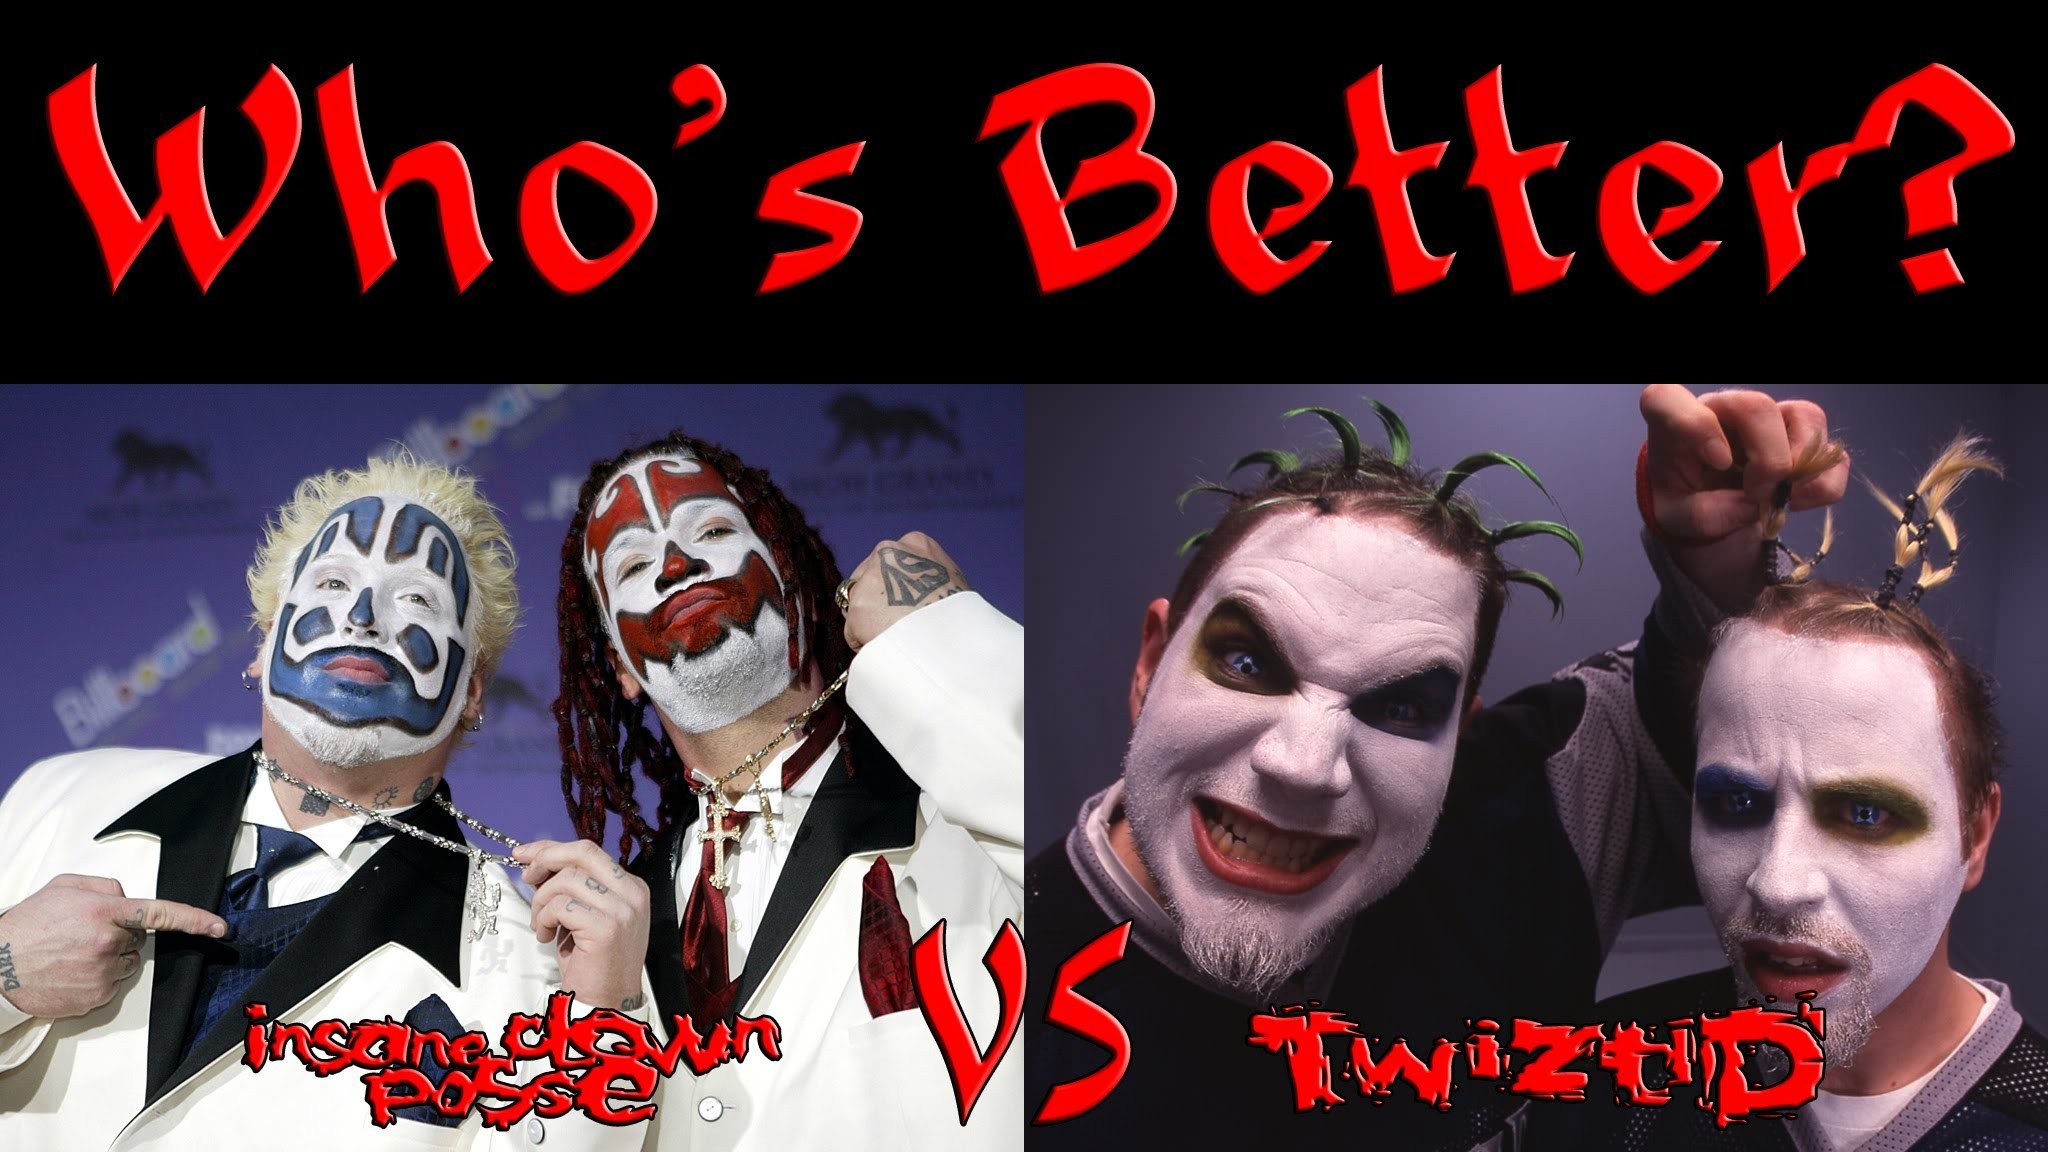 2048x1152 ICP Vs Twiztid: The Debate On Who's Better